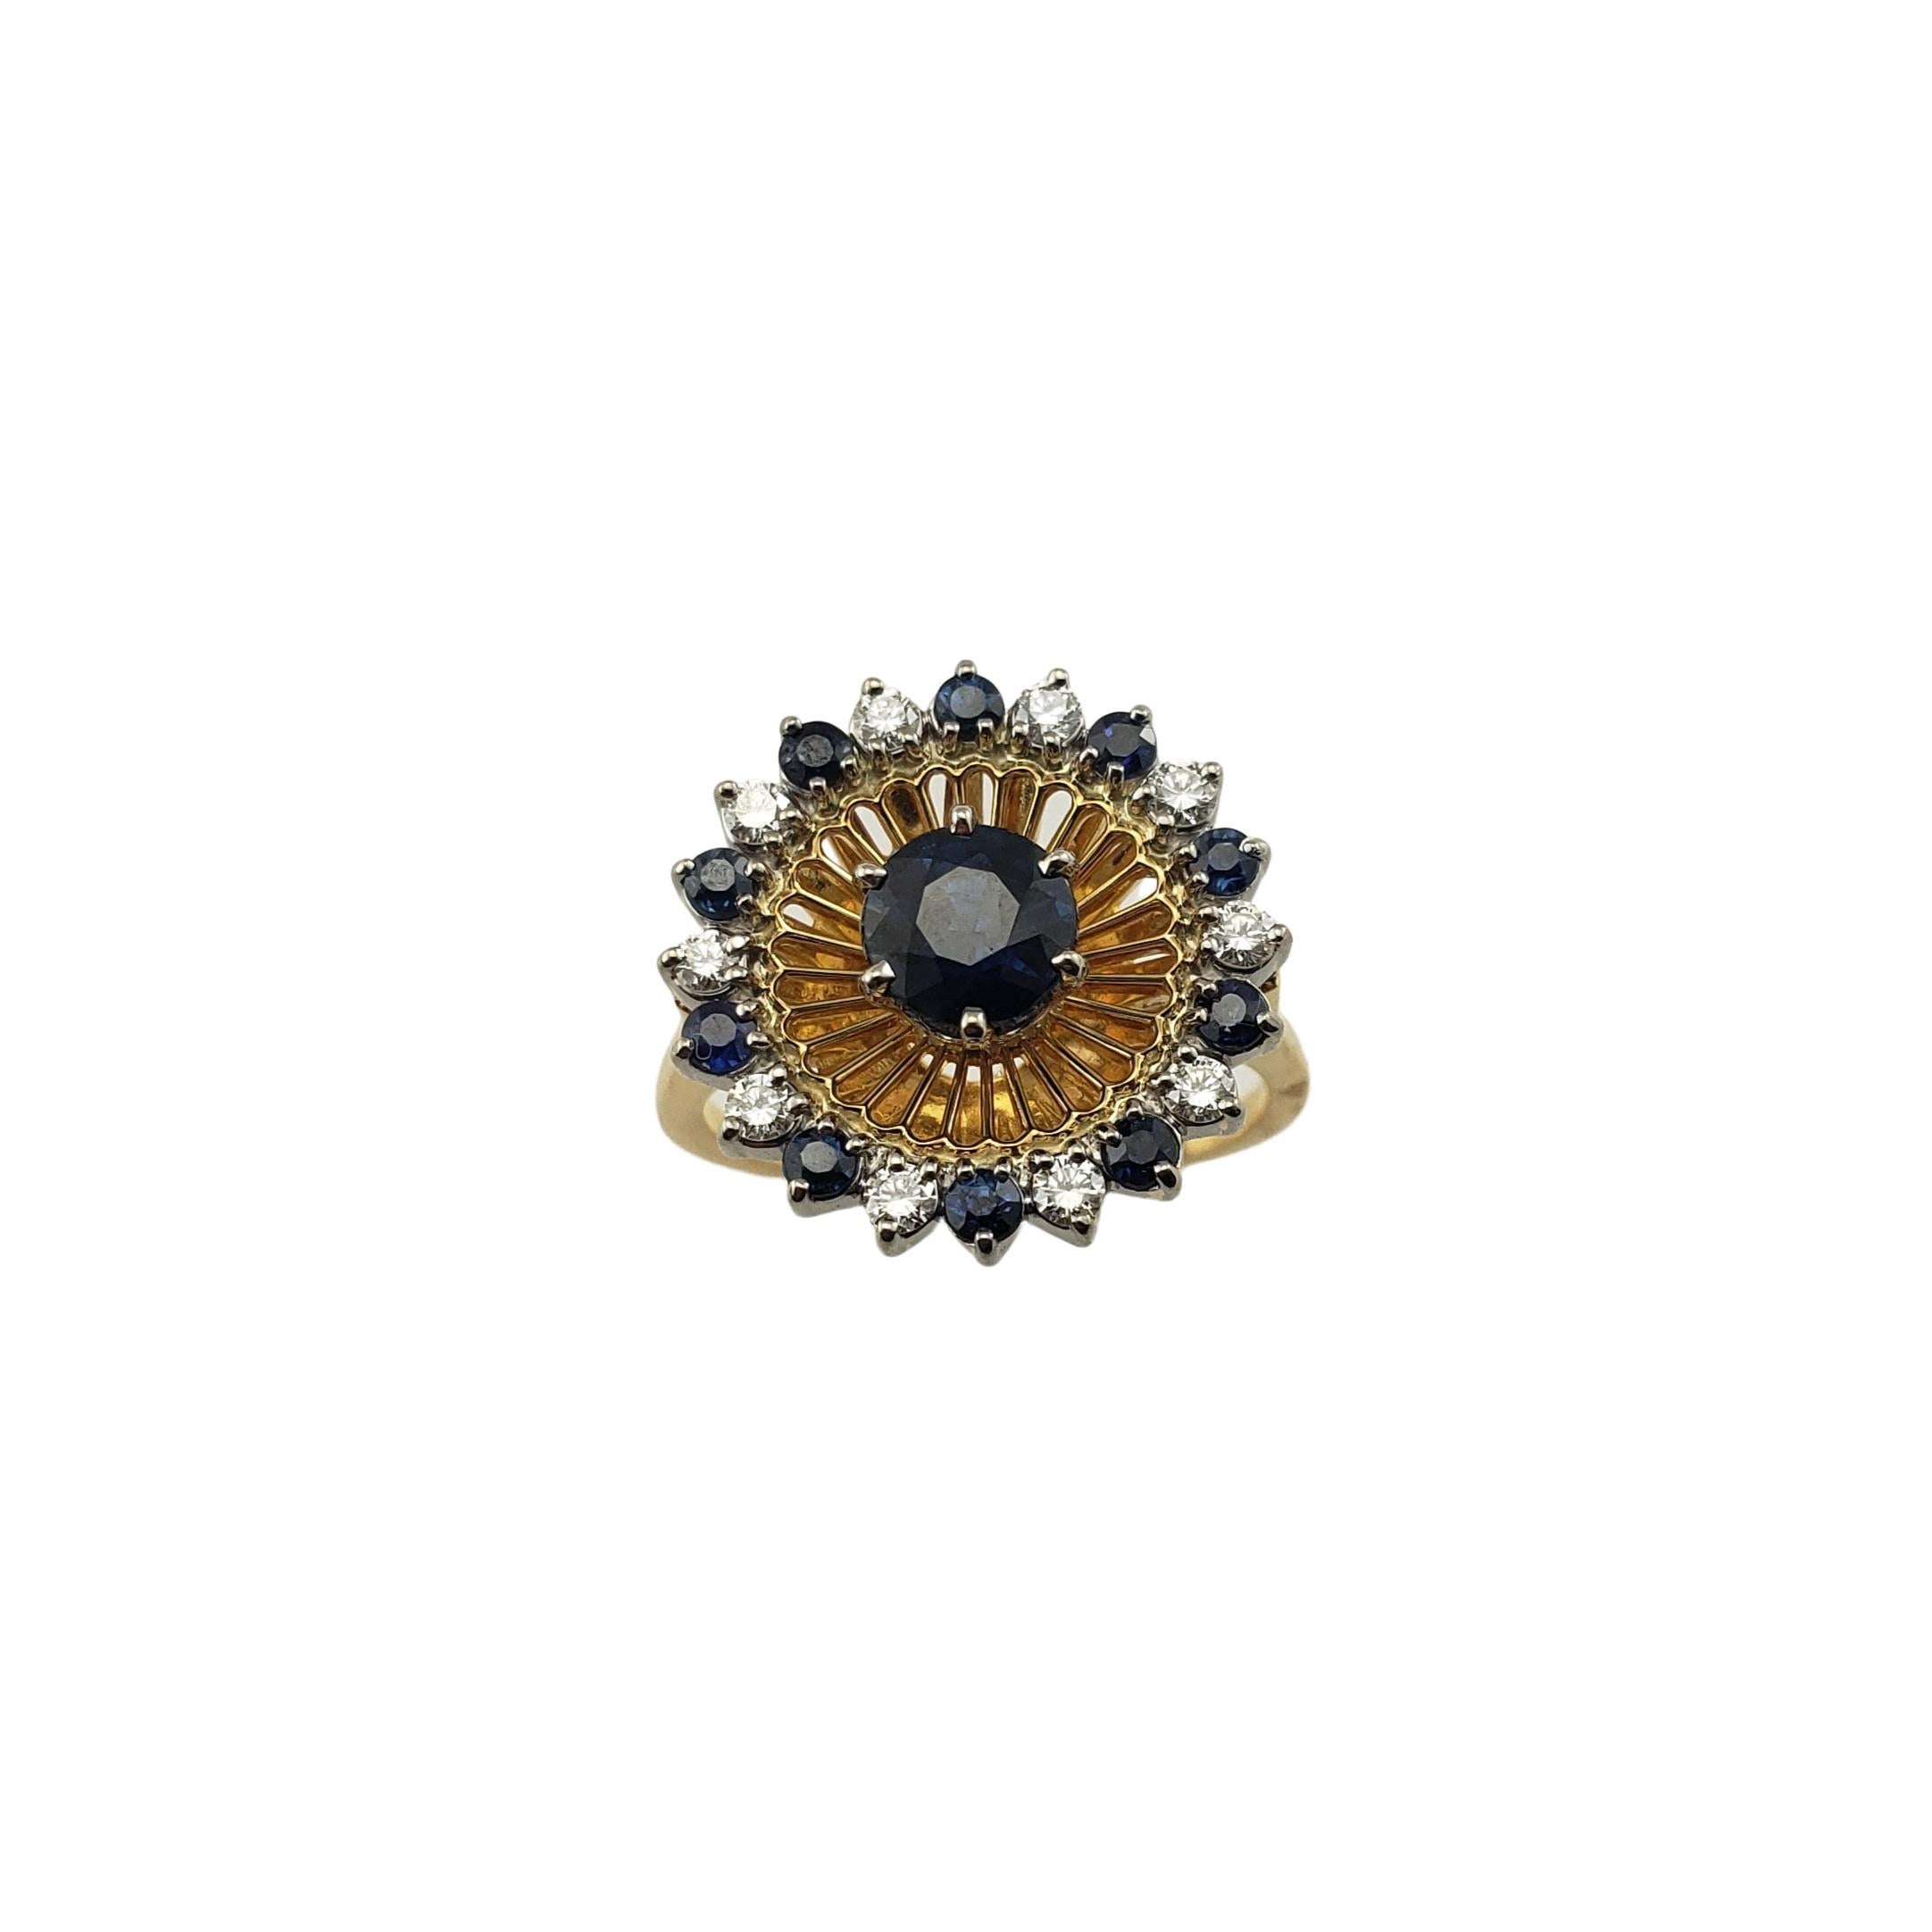 Vintage 18 Karat Yellow Gold Diamond and Natural Sapphire Ring Size 5-

This stunning ring features 10 round brilliant cut diamonds and 11 round natural sapphires (center: 5 mm) set in beautifully detailed 18K yellow gold.  Top of ring measures 16